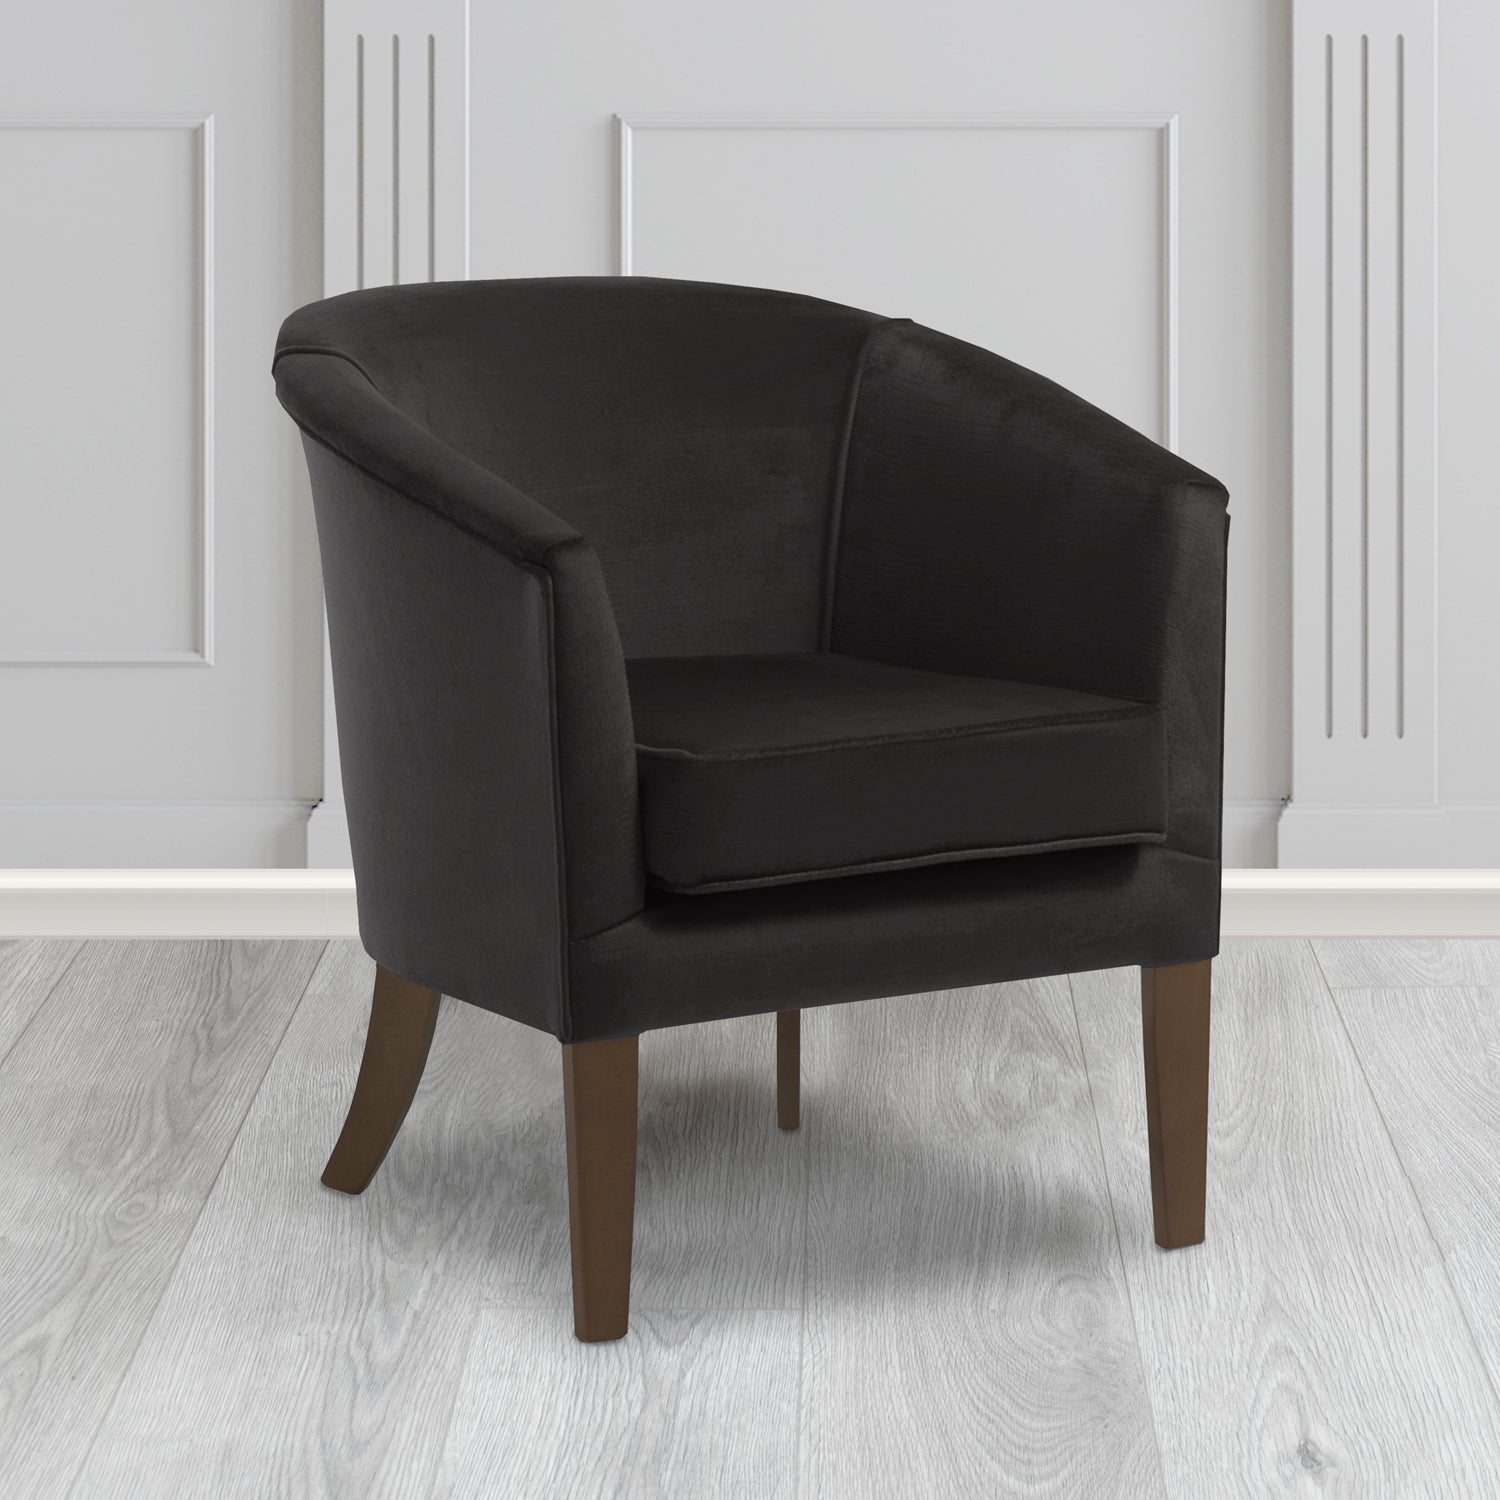 Jazz Tub Chair in Noble 949 Noir Crib 5 Velvet Fabric - Water Resistant - The Tub Chair Shop